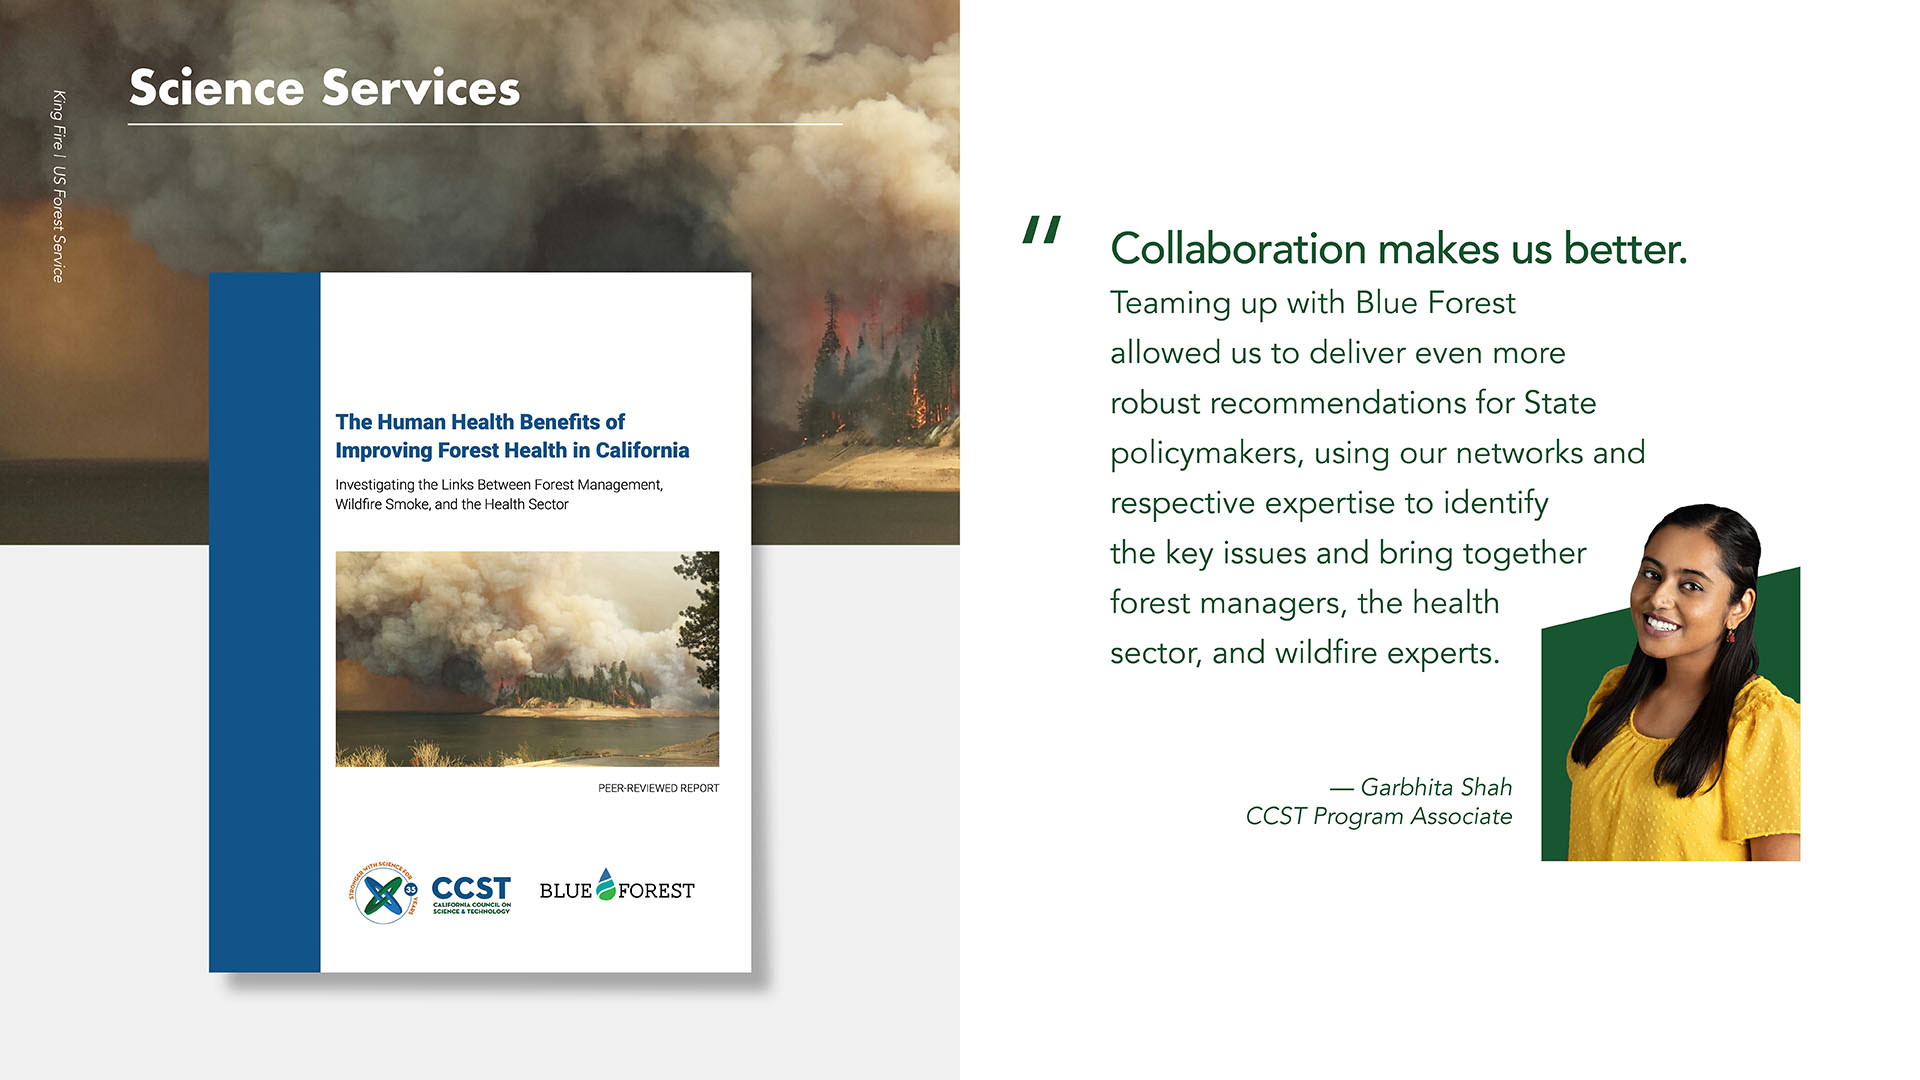 A graphic featuring a background image of a wildfire, the cover of CCST's wildfire study, and a quote from CCST Program Associate Garbhita Shah with a picture of her on a green background: "Collaboration makes us better. Teaming up with Blue Forest allowed us to deliver even more robust recommendations for State policymakers, using our networks and respective expertise to identify the key issues and bring together forest managers, the health sector, and wildfire experts."